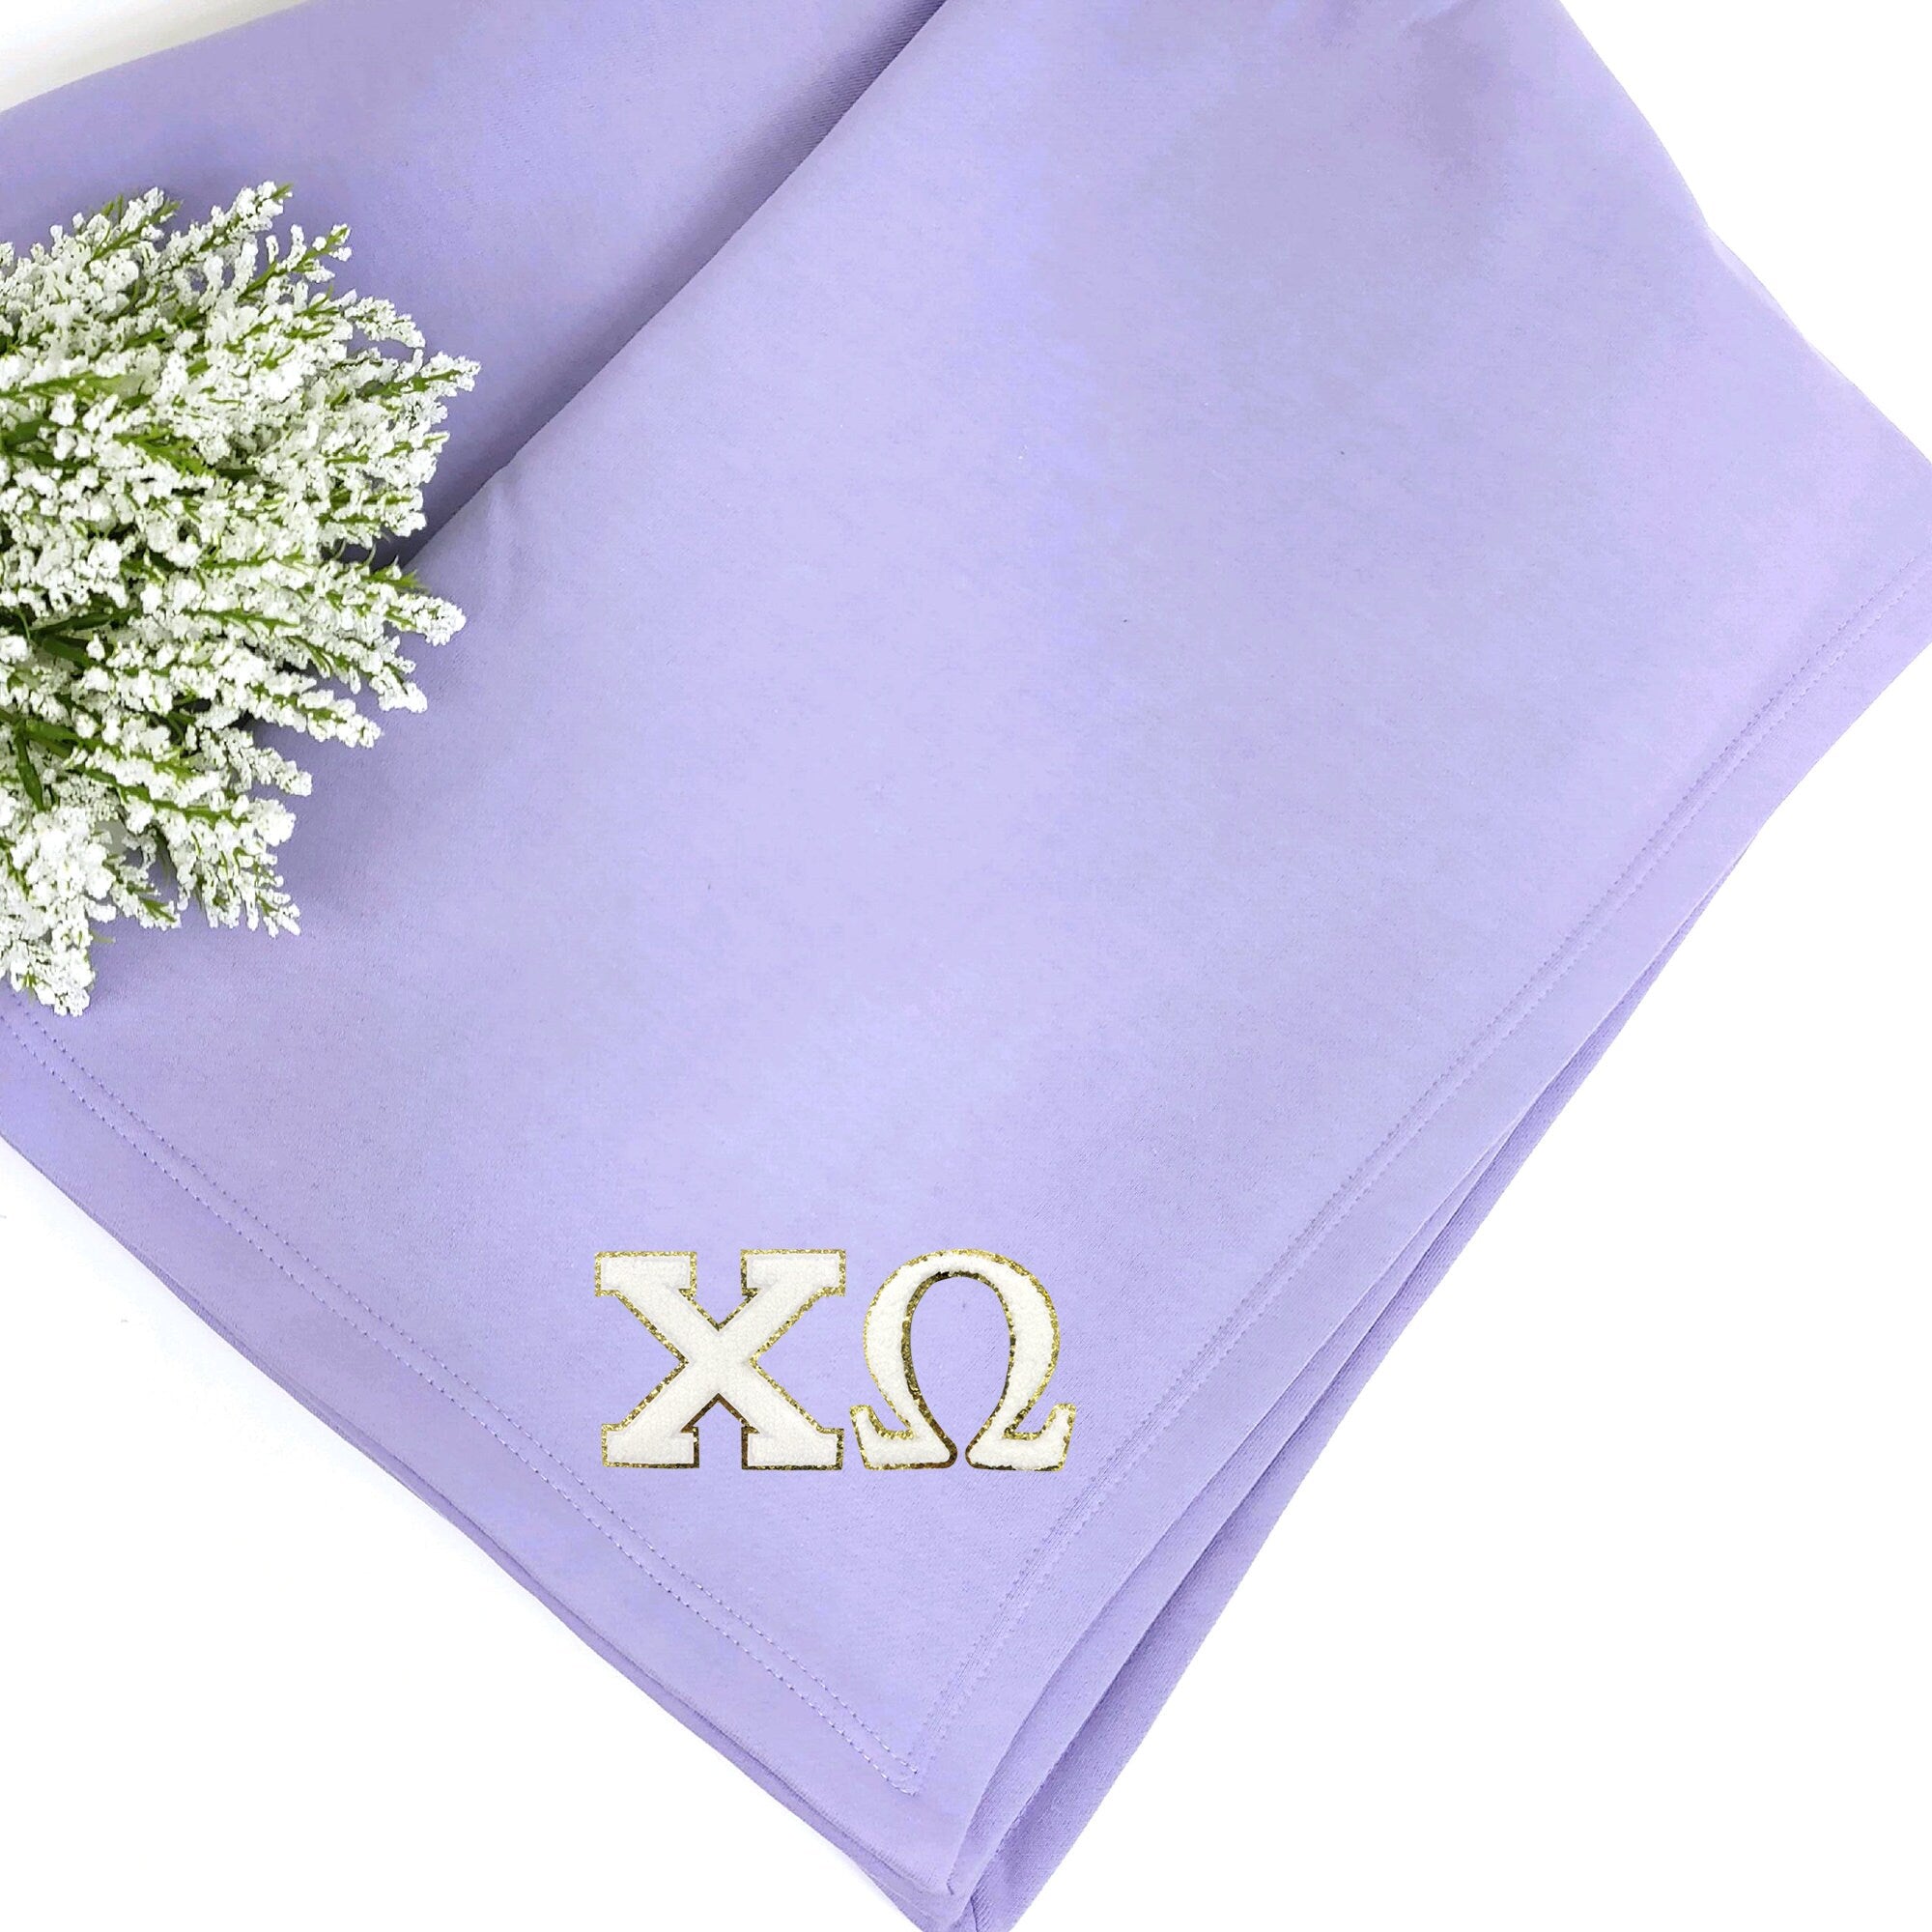 Chi Omega Patch Sweatshirt Blanket, Warm and Soft, Perfect Sorority Gift